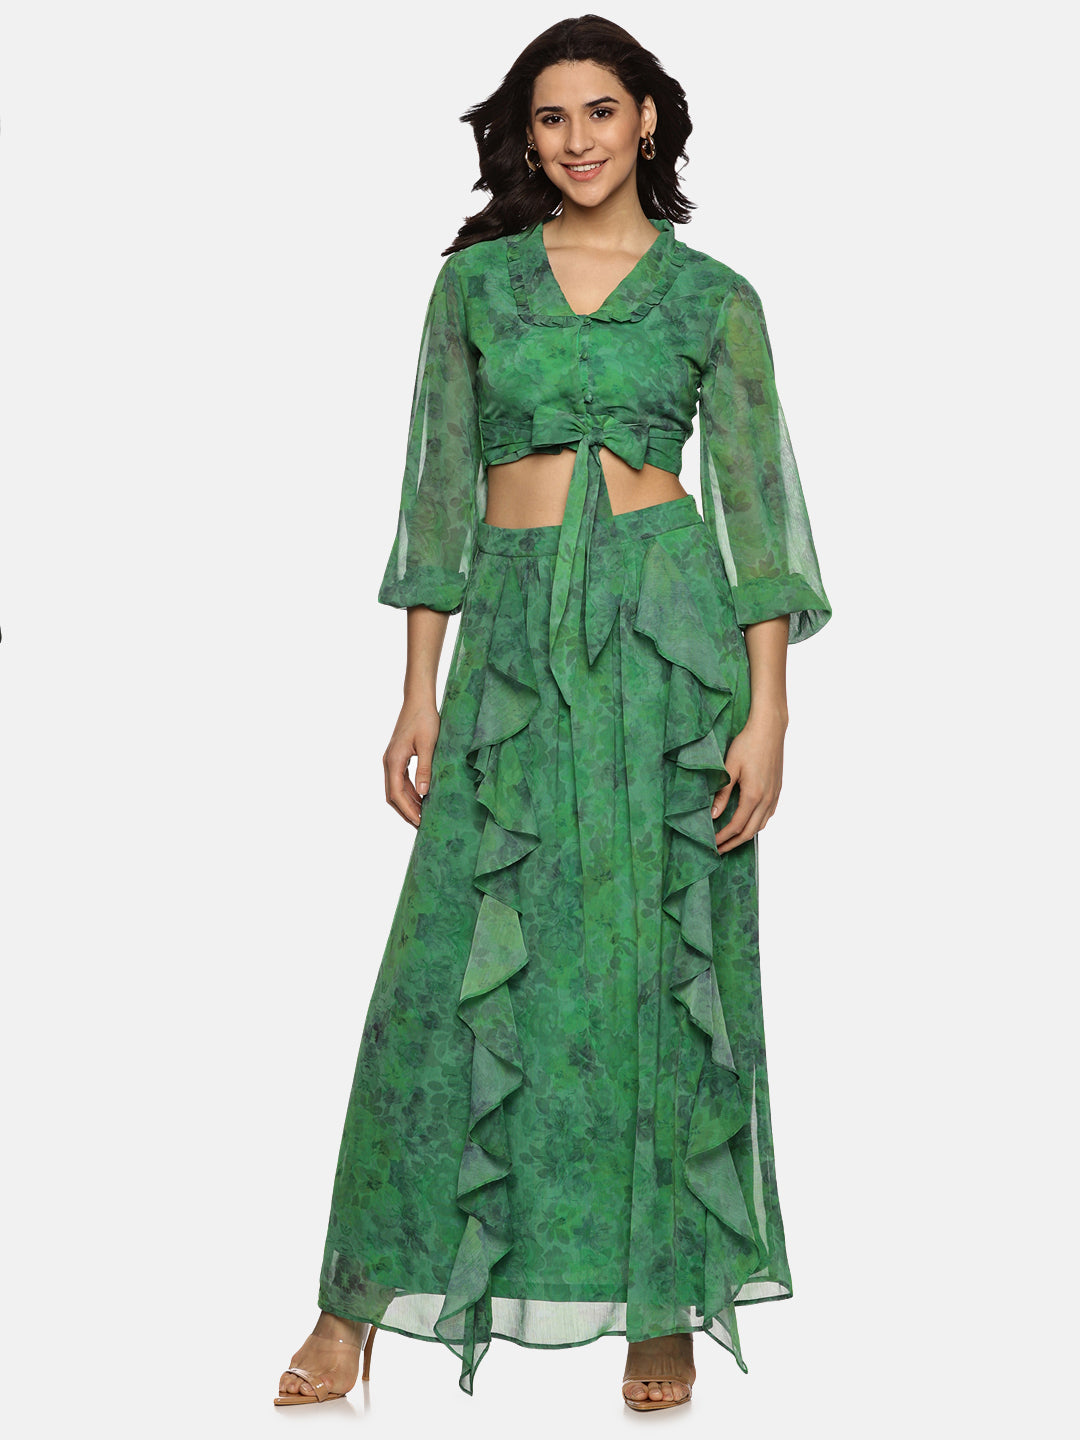 Buy Green Printed Floral Chiffon Fabric | Flare Detail Co-ord Set Online In India